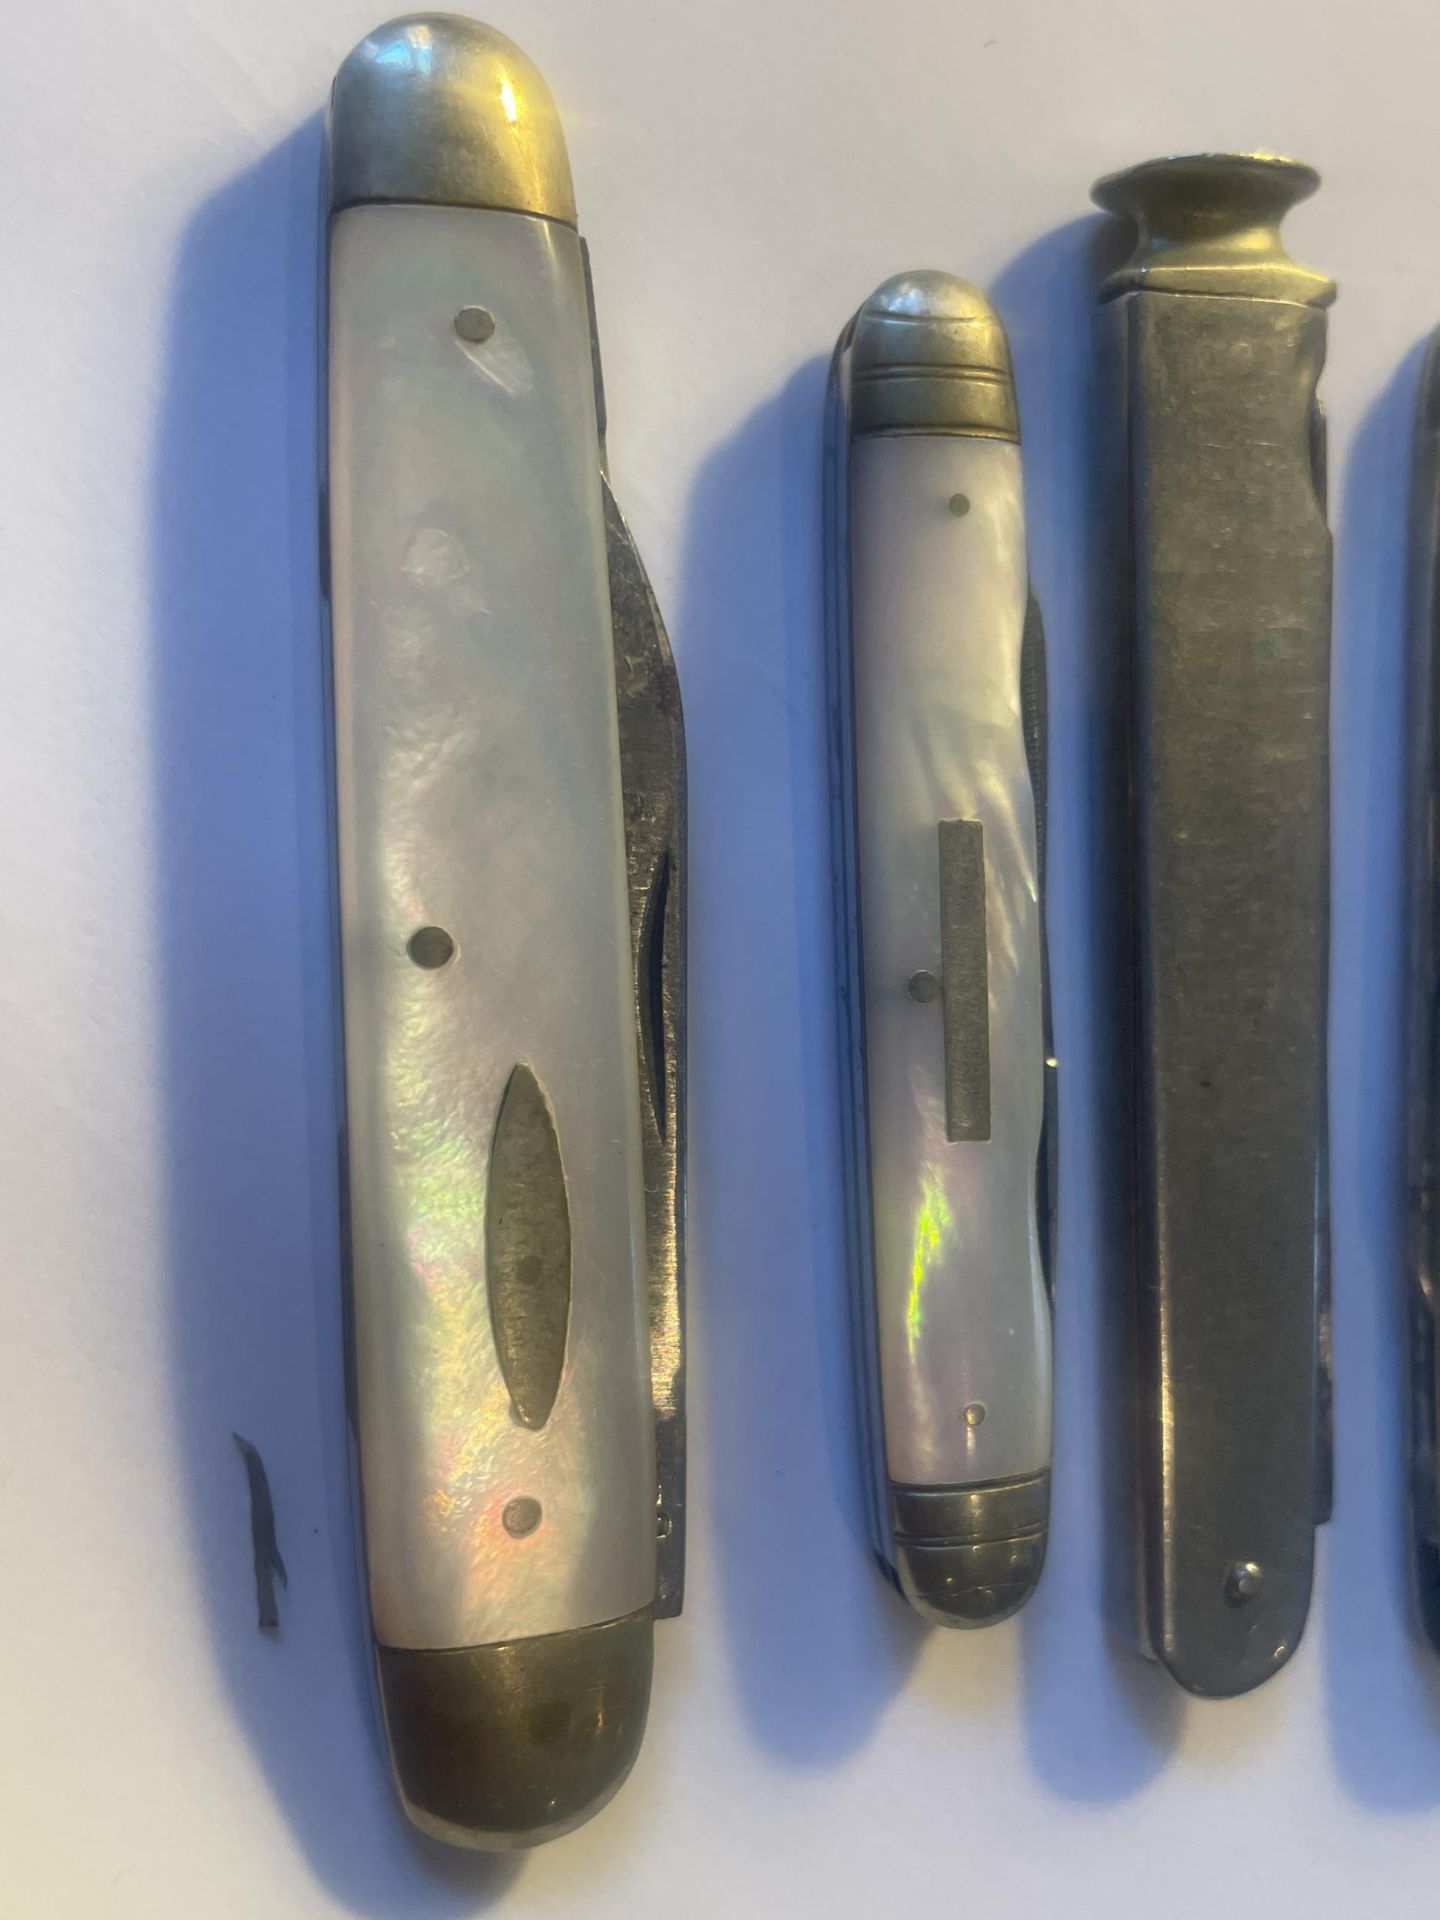 SIX VARIOUS PEN KNIVES TI INCLUDE MOTHER OF PEARL EXAMPLES - Image 3 of 4